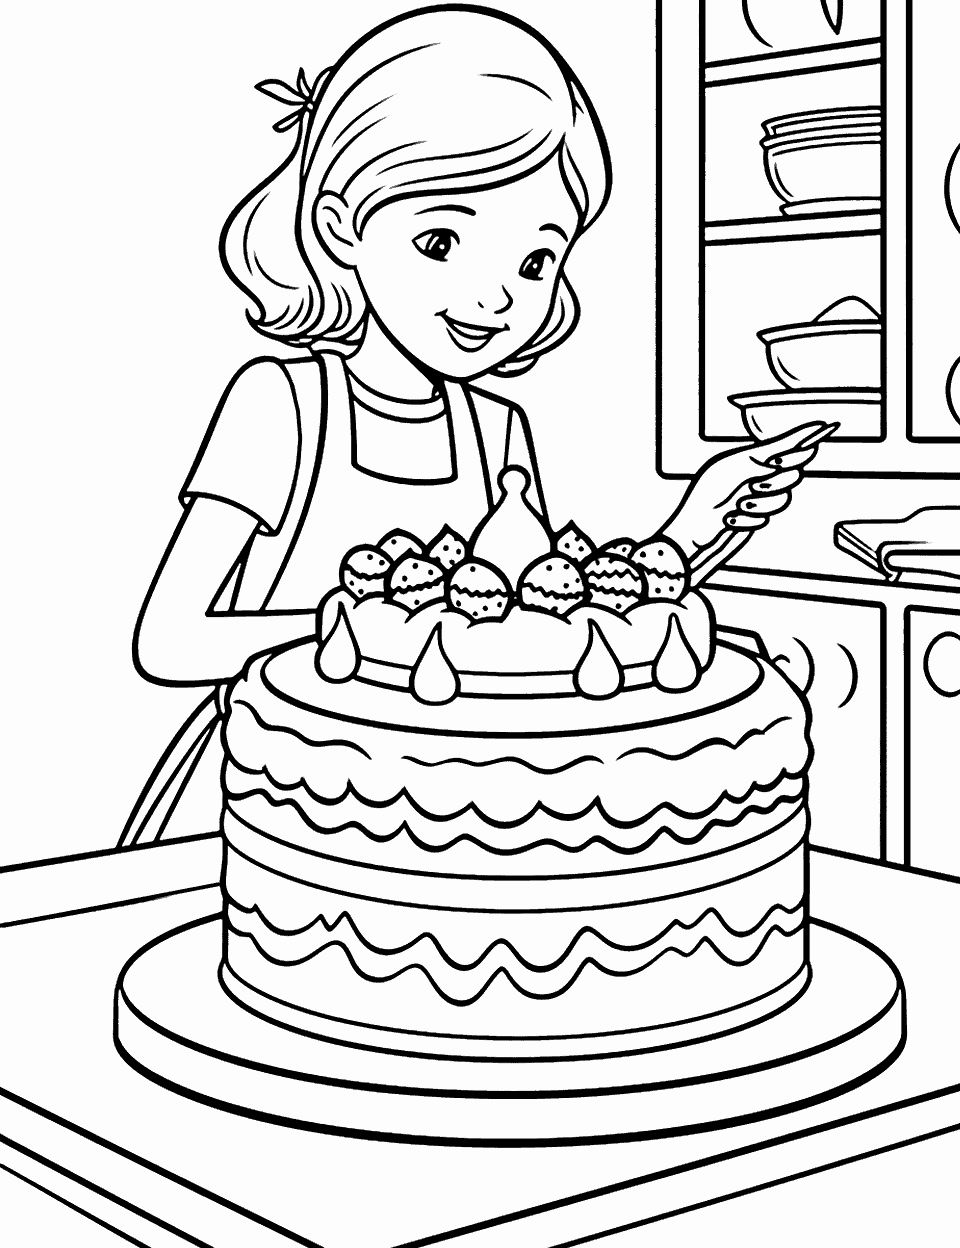 Decorating Masterpiece Cake Coloring Page - A cake in the process of being decorated with intricate icing patterns.